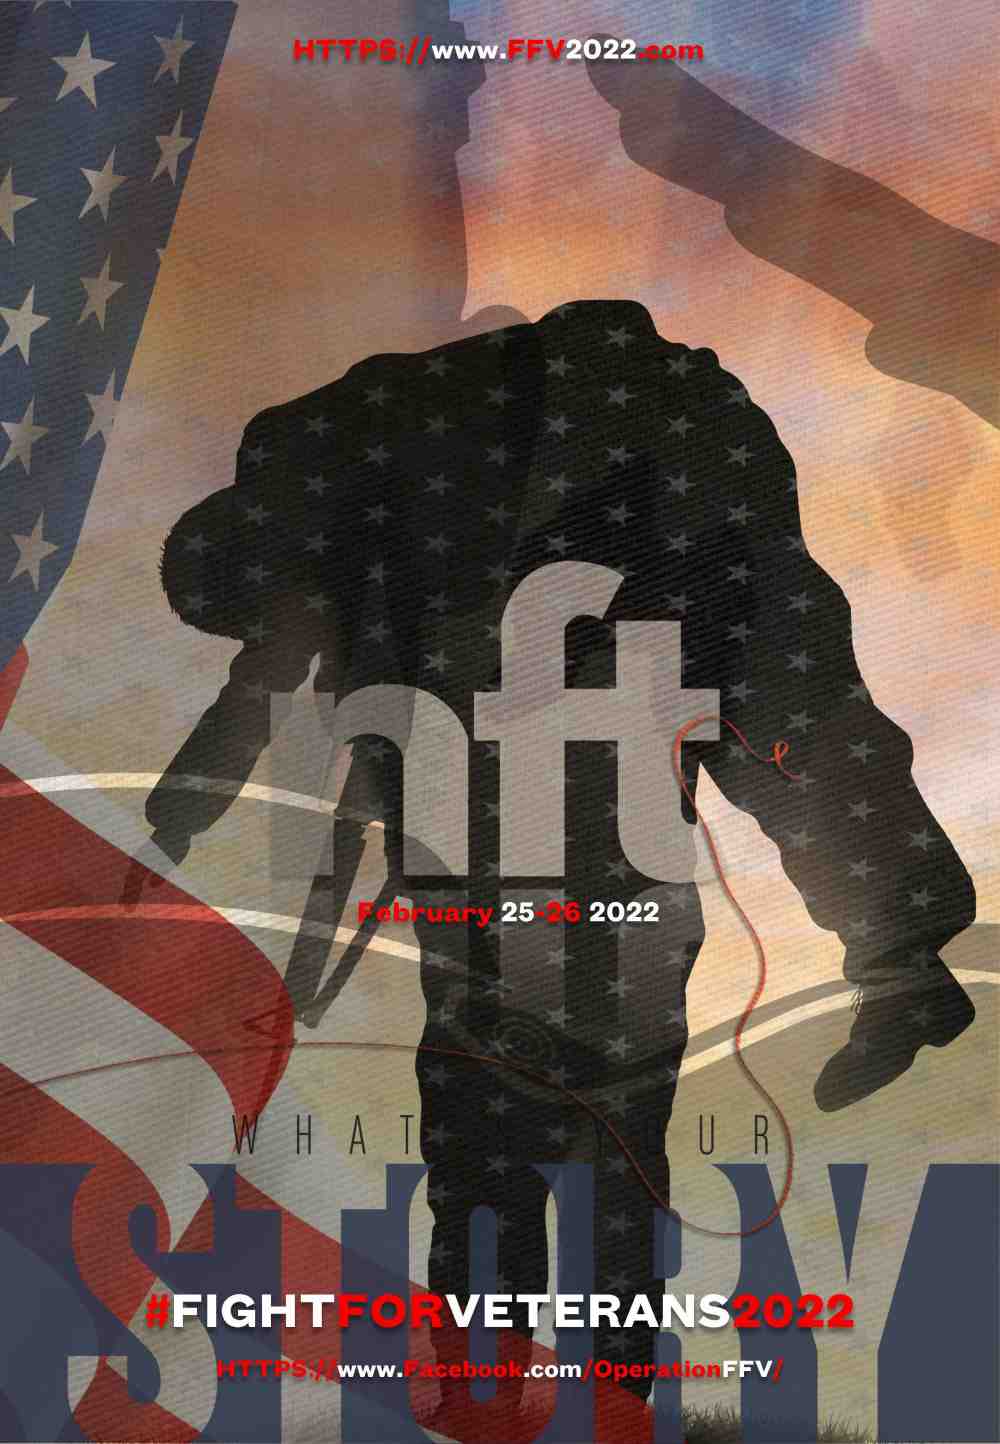 FIght for Veterans 2022, Two (2) Day Live Streaming NFT Social Arts Exhibition And Auction Produced by Royster Is Rescheduled For February 2022 Due To Alarming Covid 19 Concerns